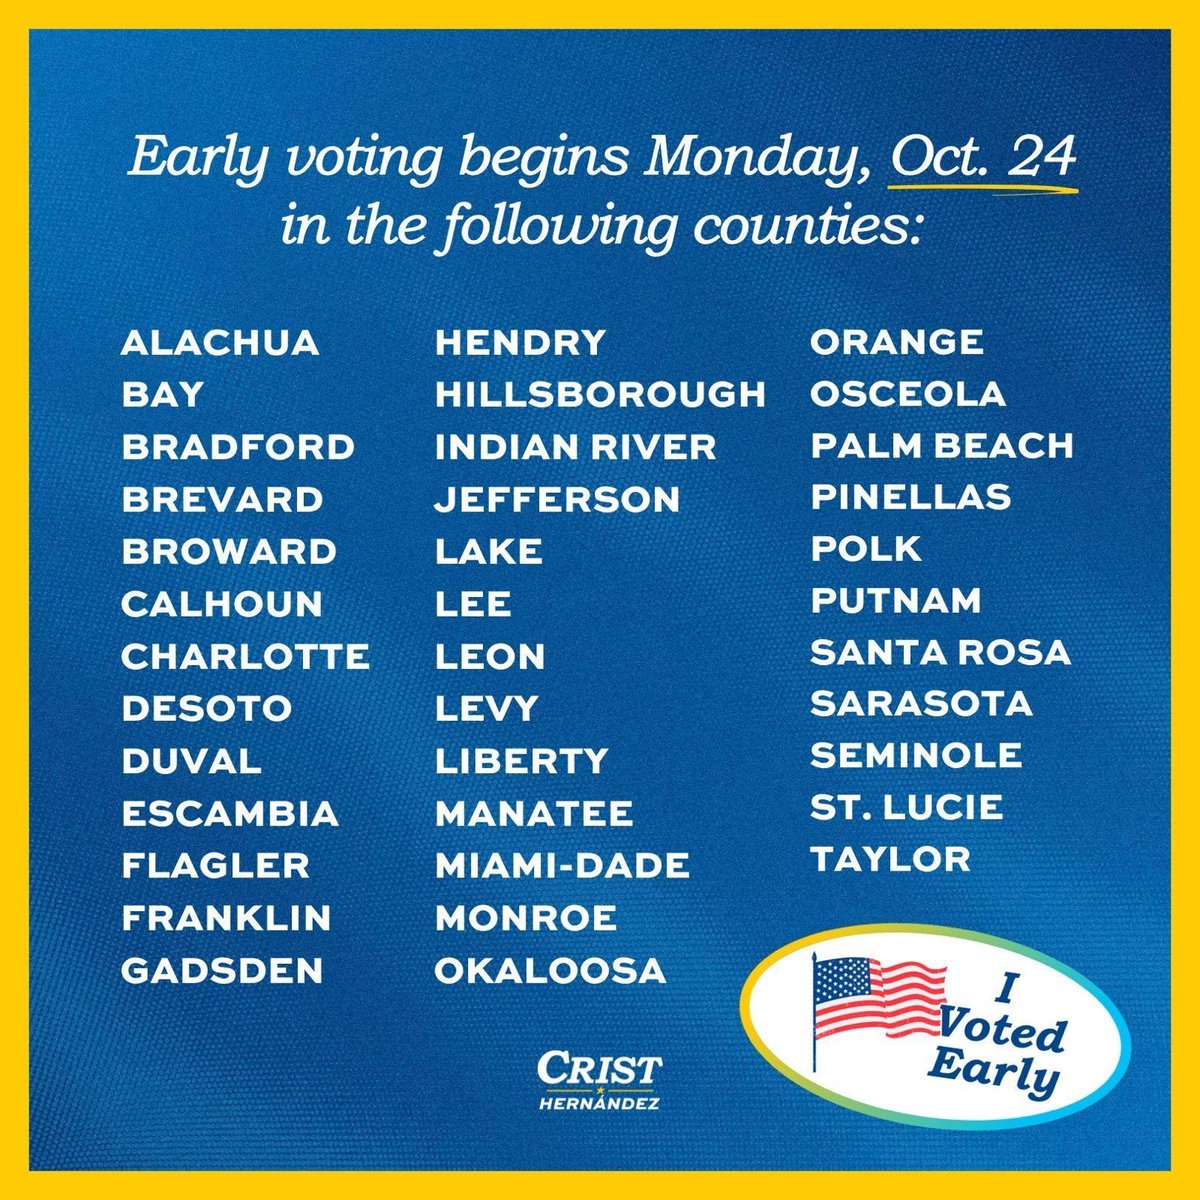 Early voting begins Monday for several counties in Florida. Find where to cast your early vote at: iwillvote.com